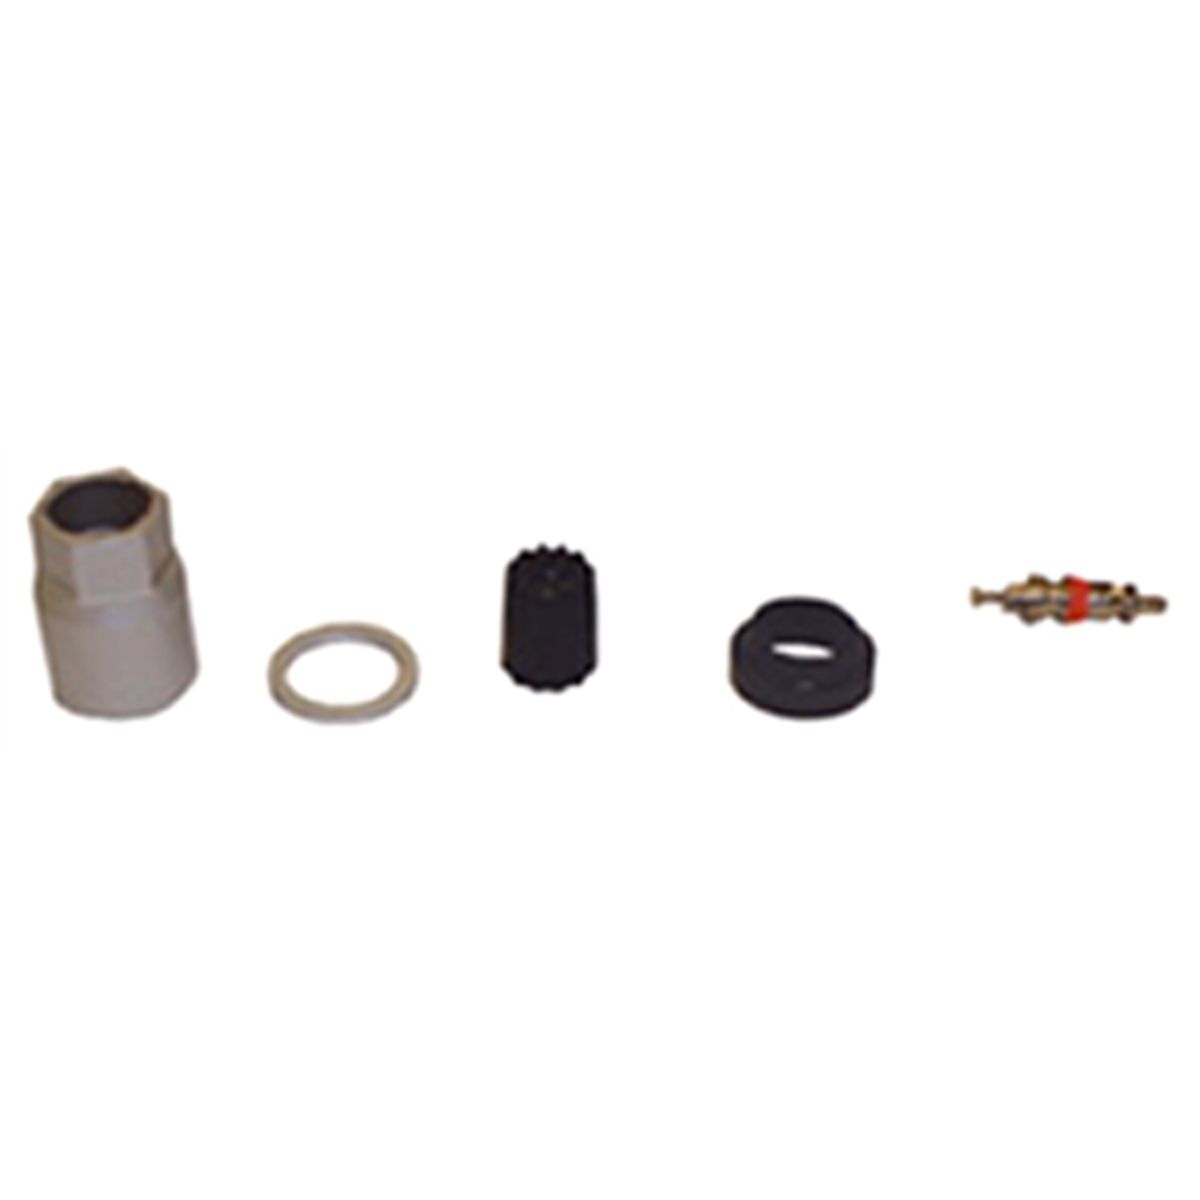 TPMS Replacement Parts Kit For Lexus, Toyota